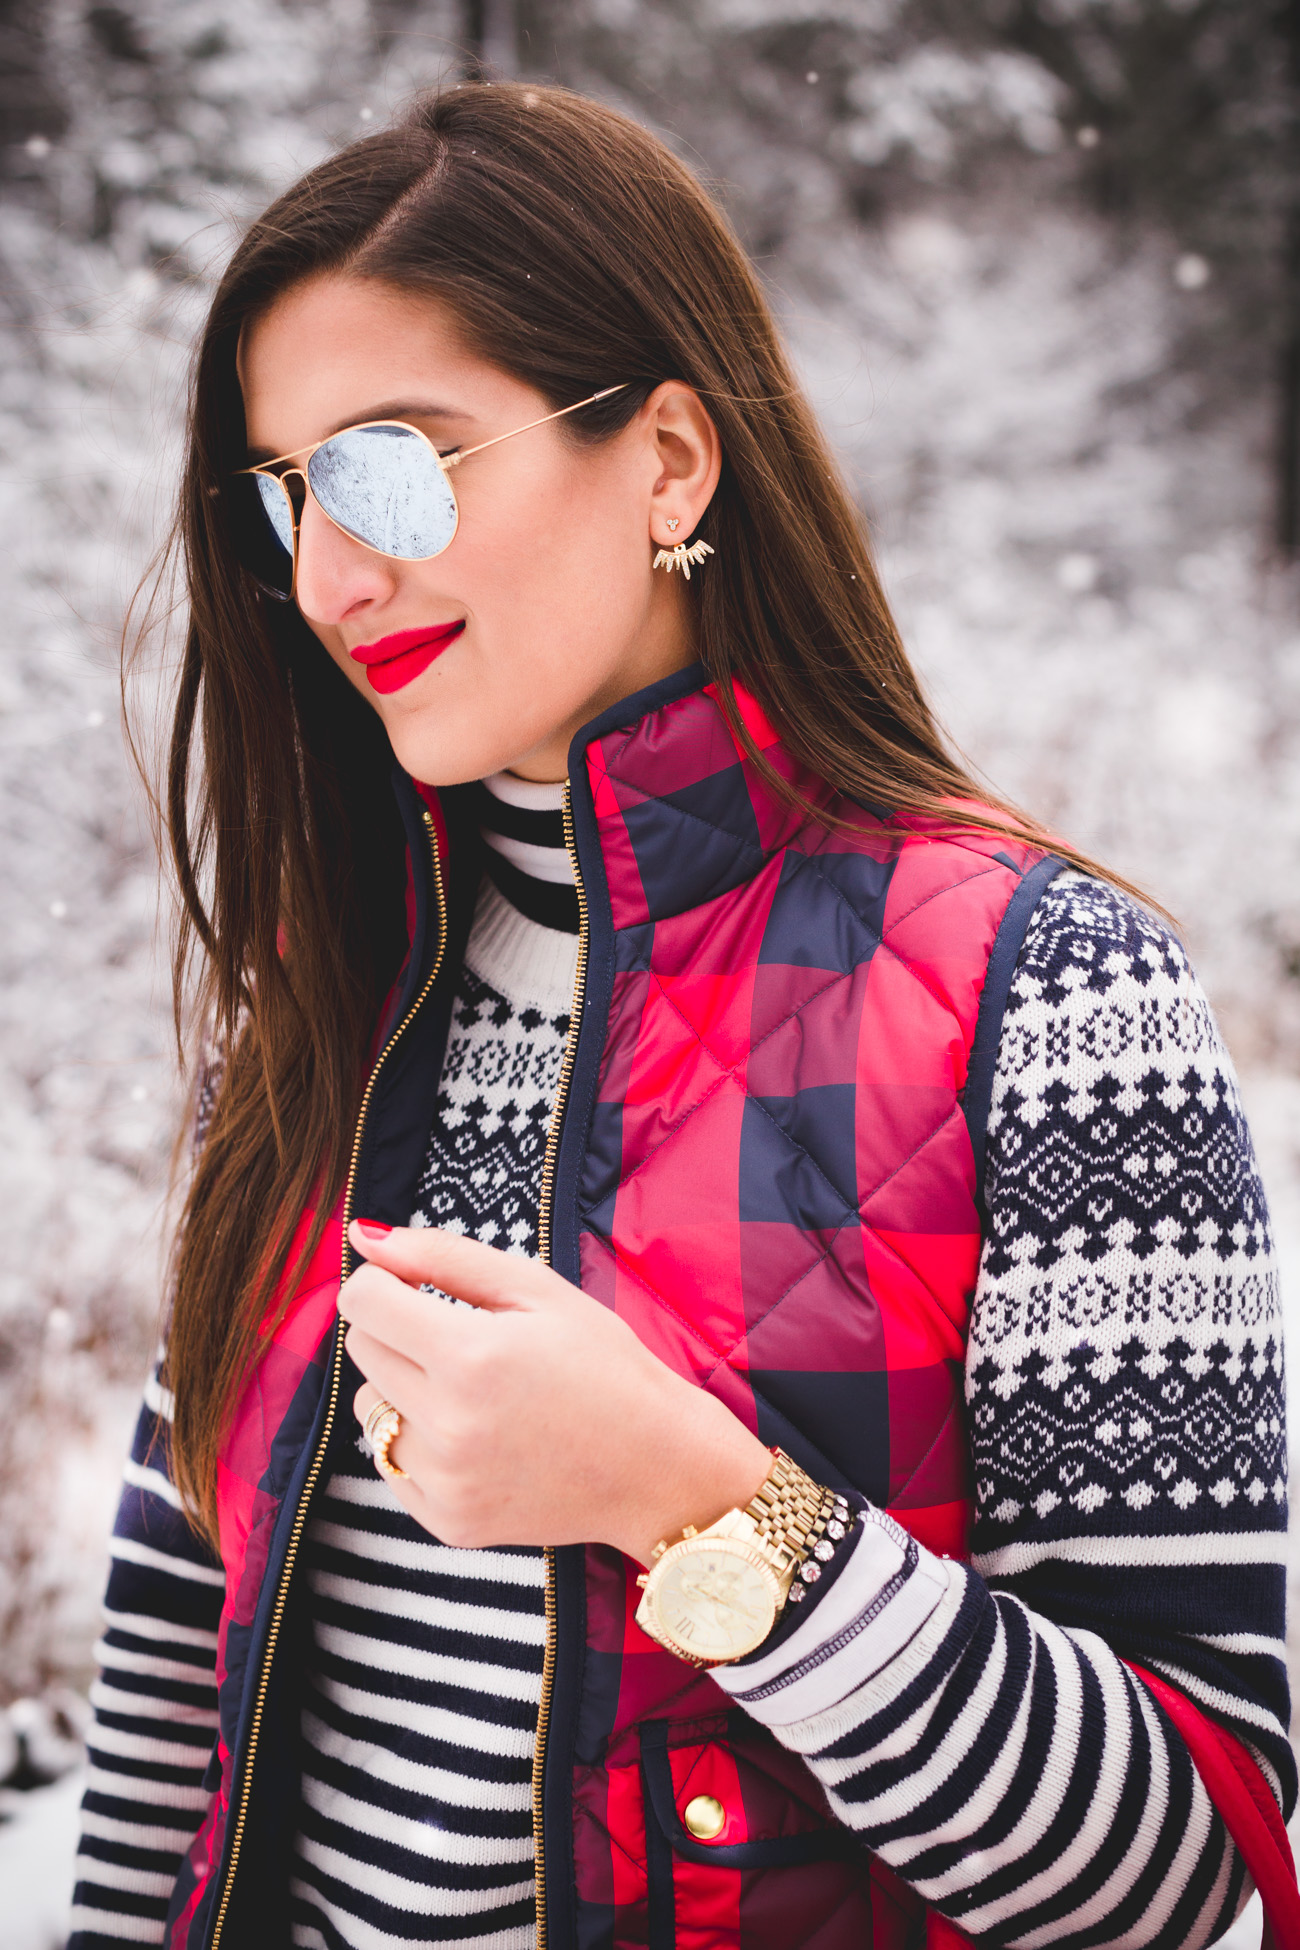 buffalo check vest, buffalo plaid quilted vest, excursion vest, red hunter boots, tour packable boots, new england winter, snow photoshoot, snow new england, snow outfit, holiday outfit, holiday outfit ideas, holiday fashion, holiday style // grace wainwright from a southern drawl